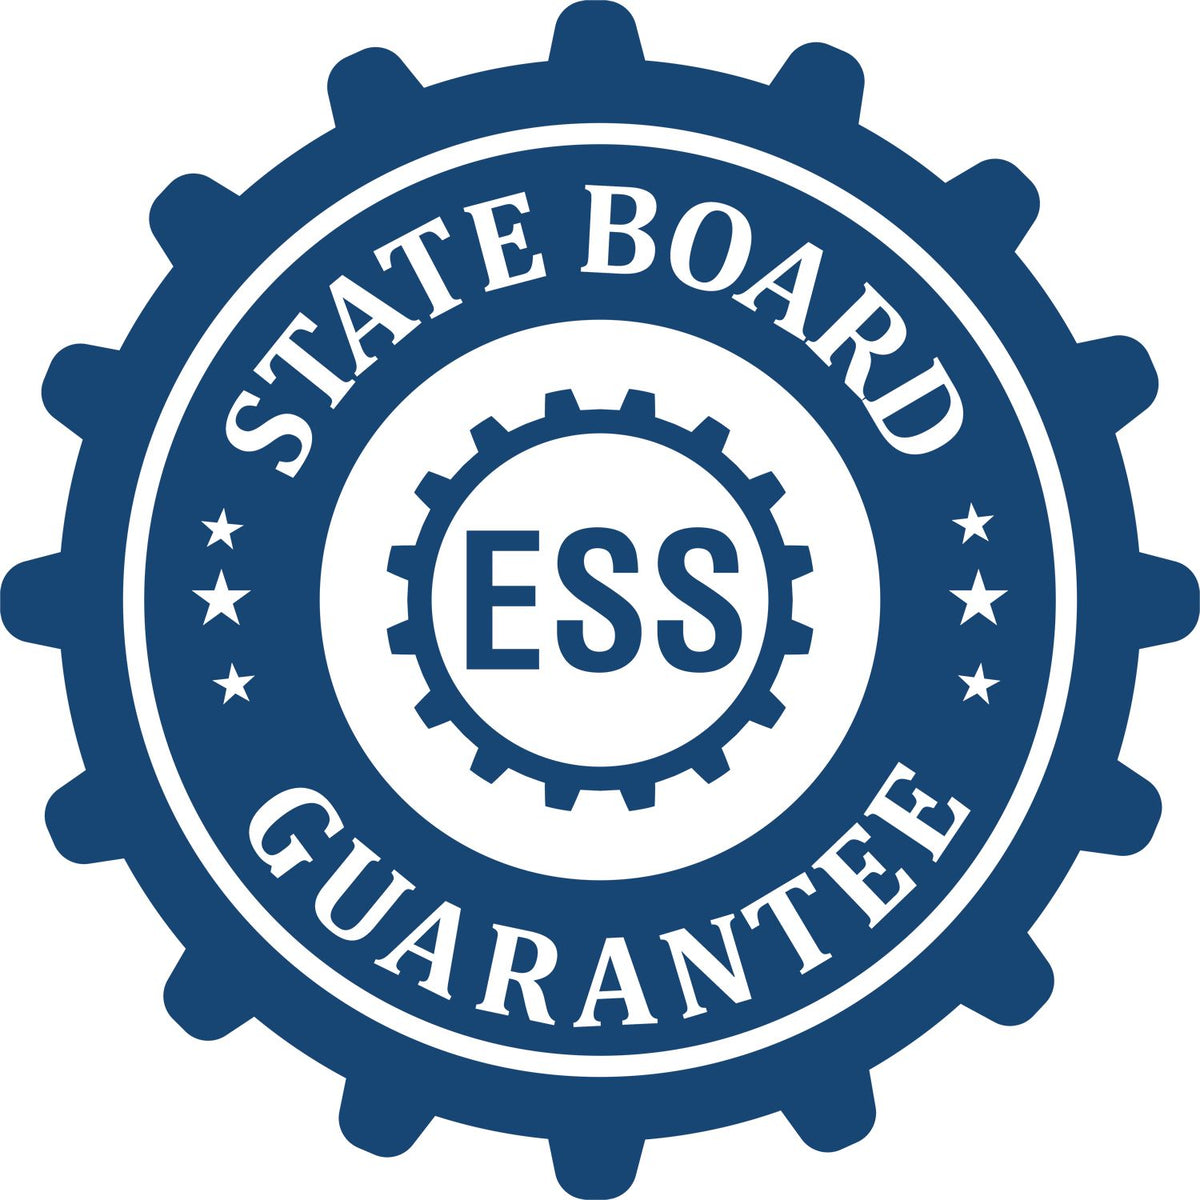 An emblem in a gear shape illustrating a state board guarantee for the Wooden Handle Alaska State Seal Notary Public Stamp product.